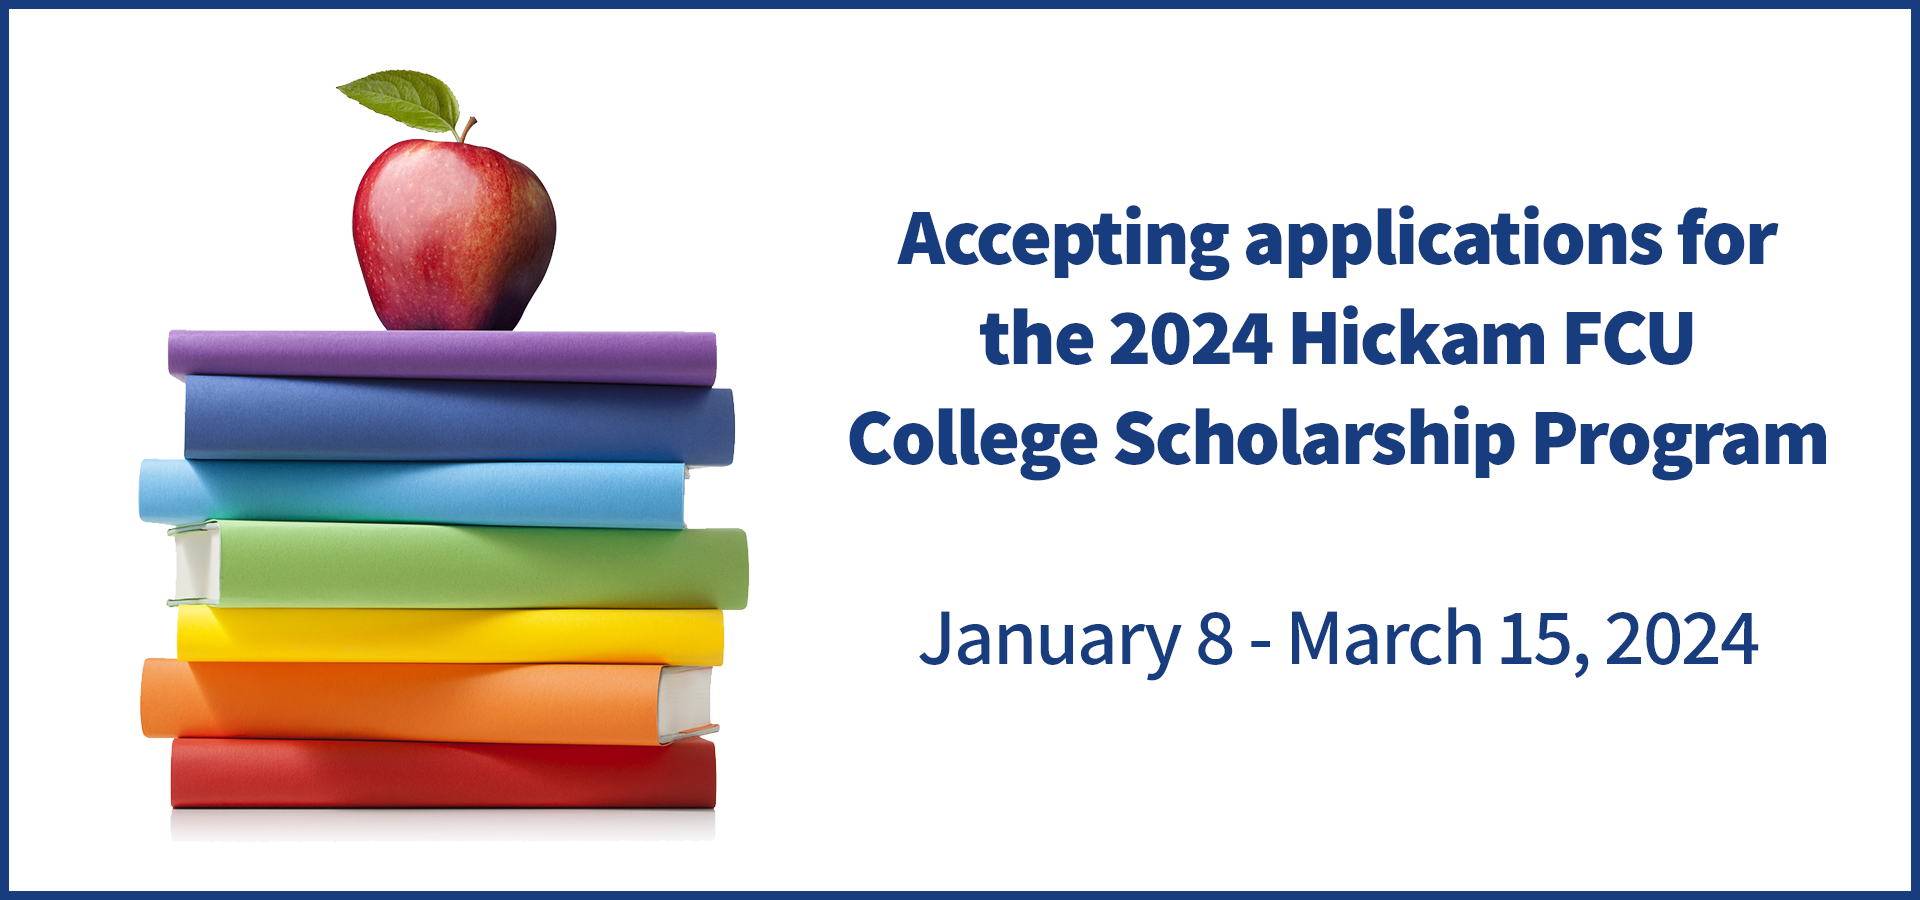 Accepting Applications for the 2024 Hickam FCU College Scholarship Program. January 8 - March 15, 2024